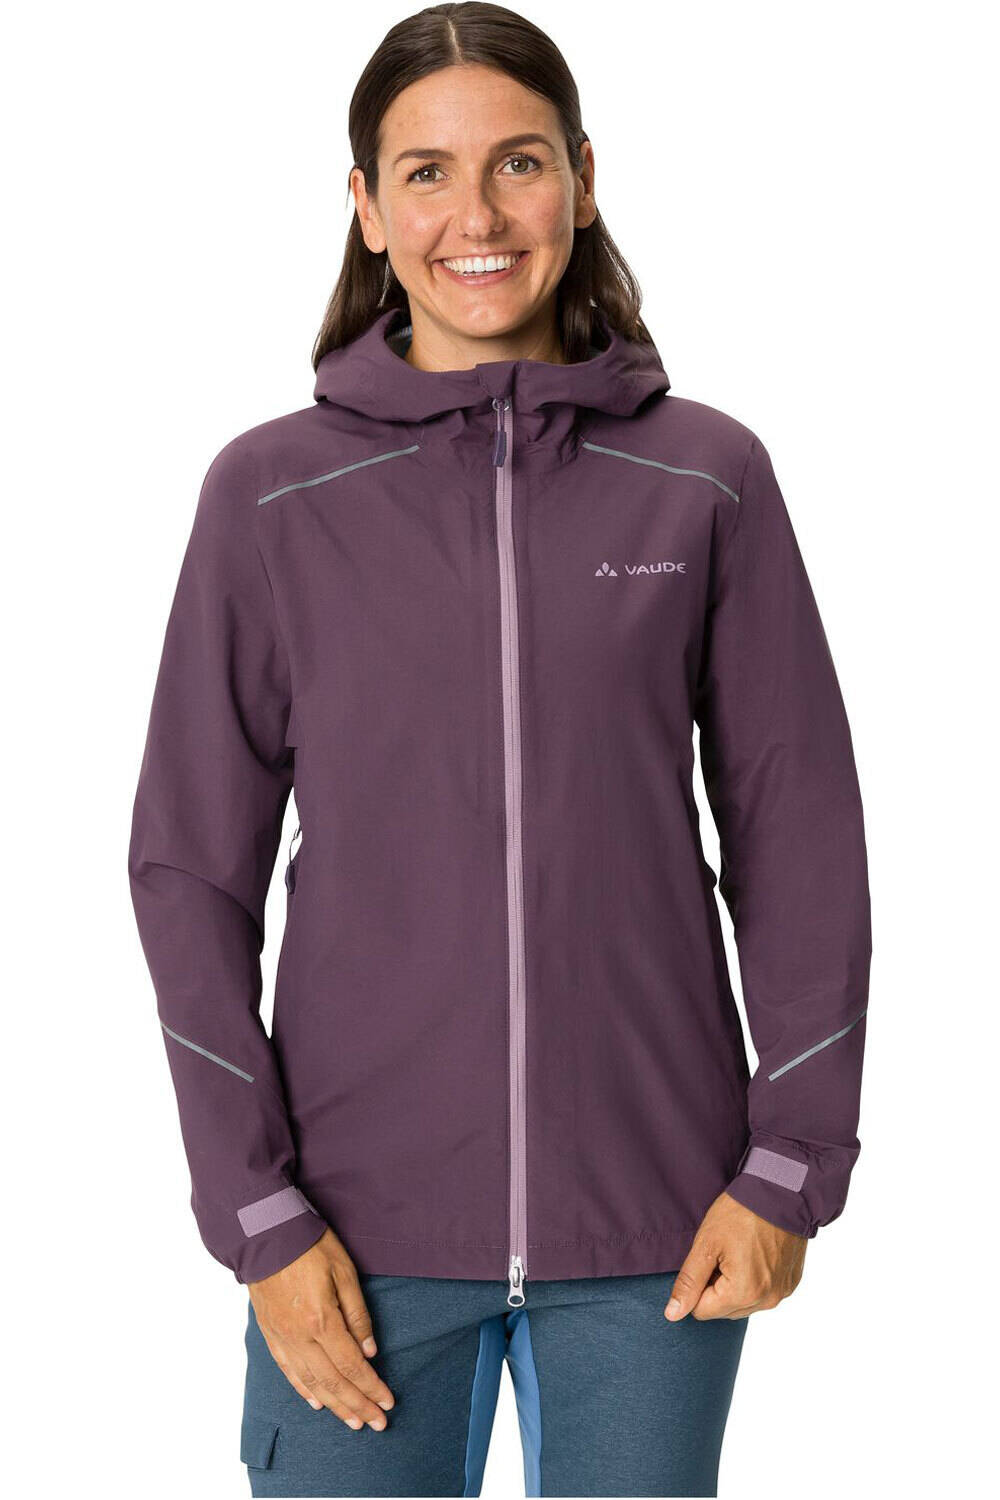 Vaude chaqueta impermeable ciclismo mujer Women's Yaras Jacket IV vista frontal